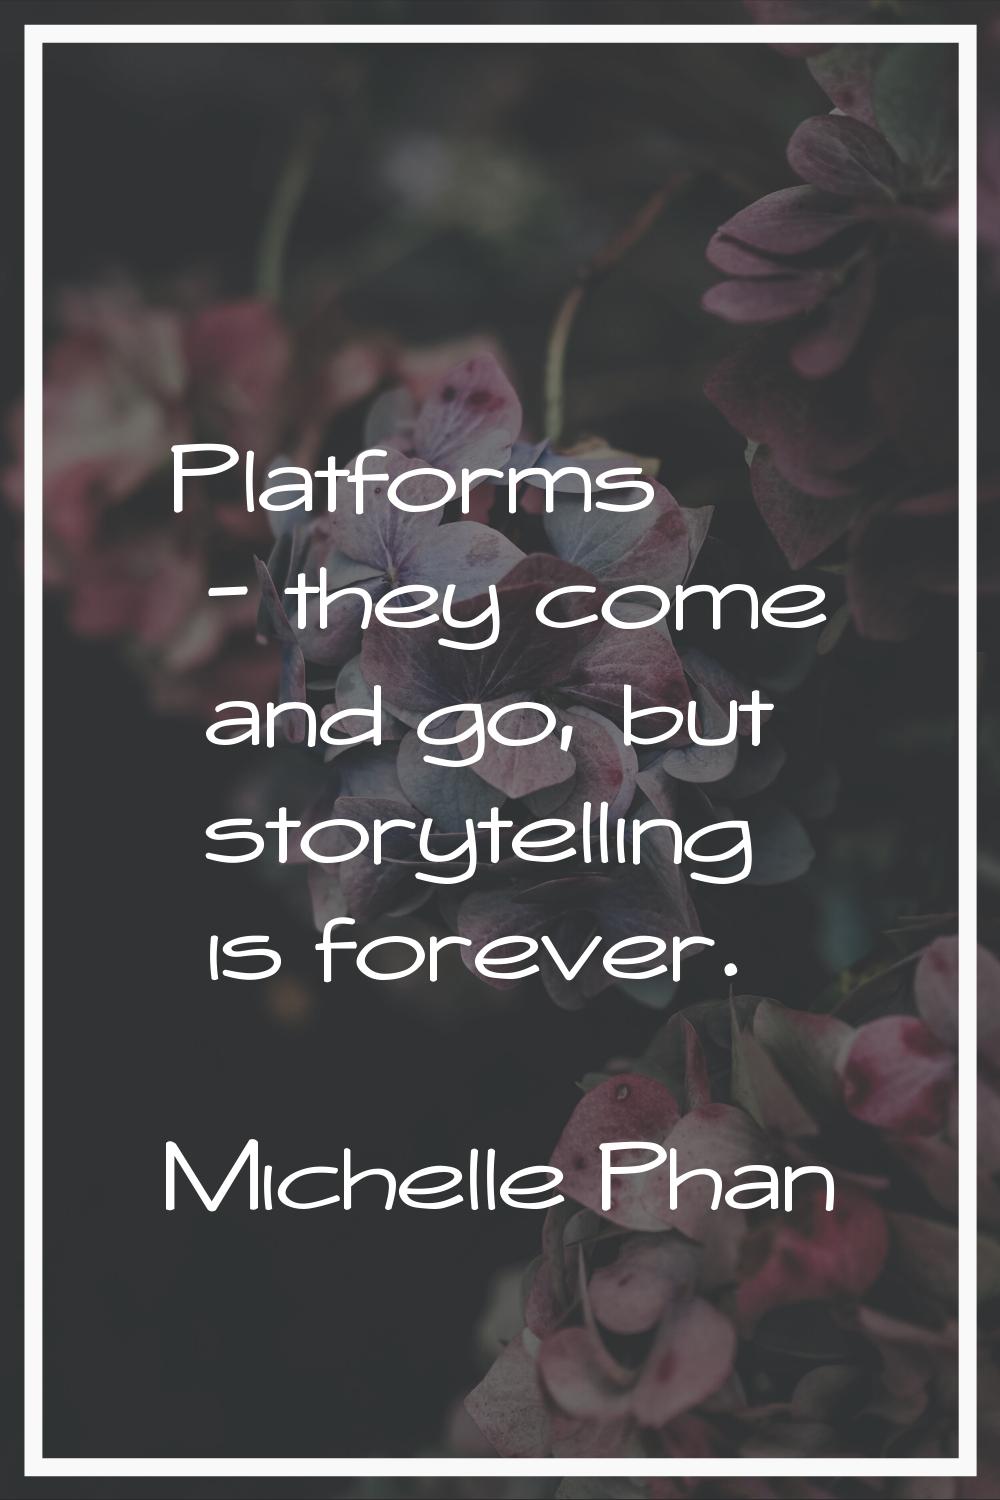 Platforms - they come and go, but storytelling is forever.